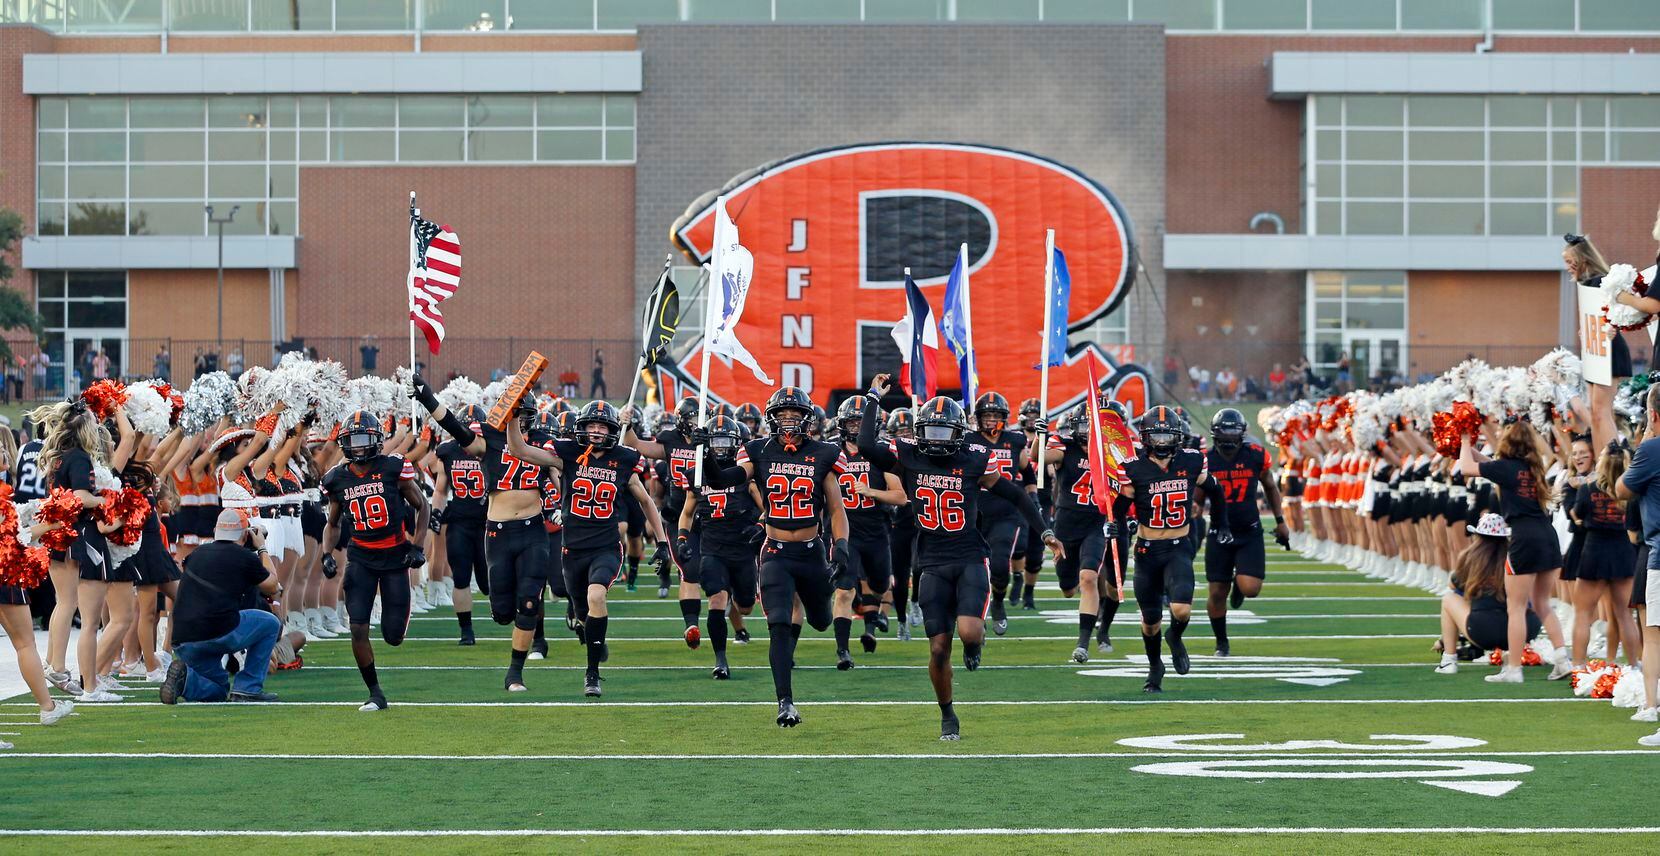 The Rockwall Yellowjackets take the field before the first half of a high school football...